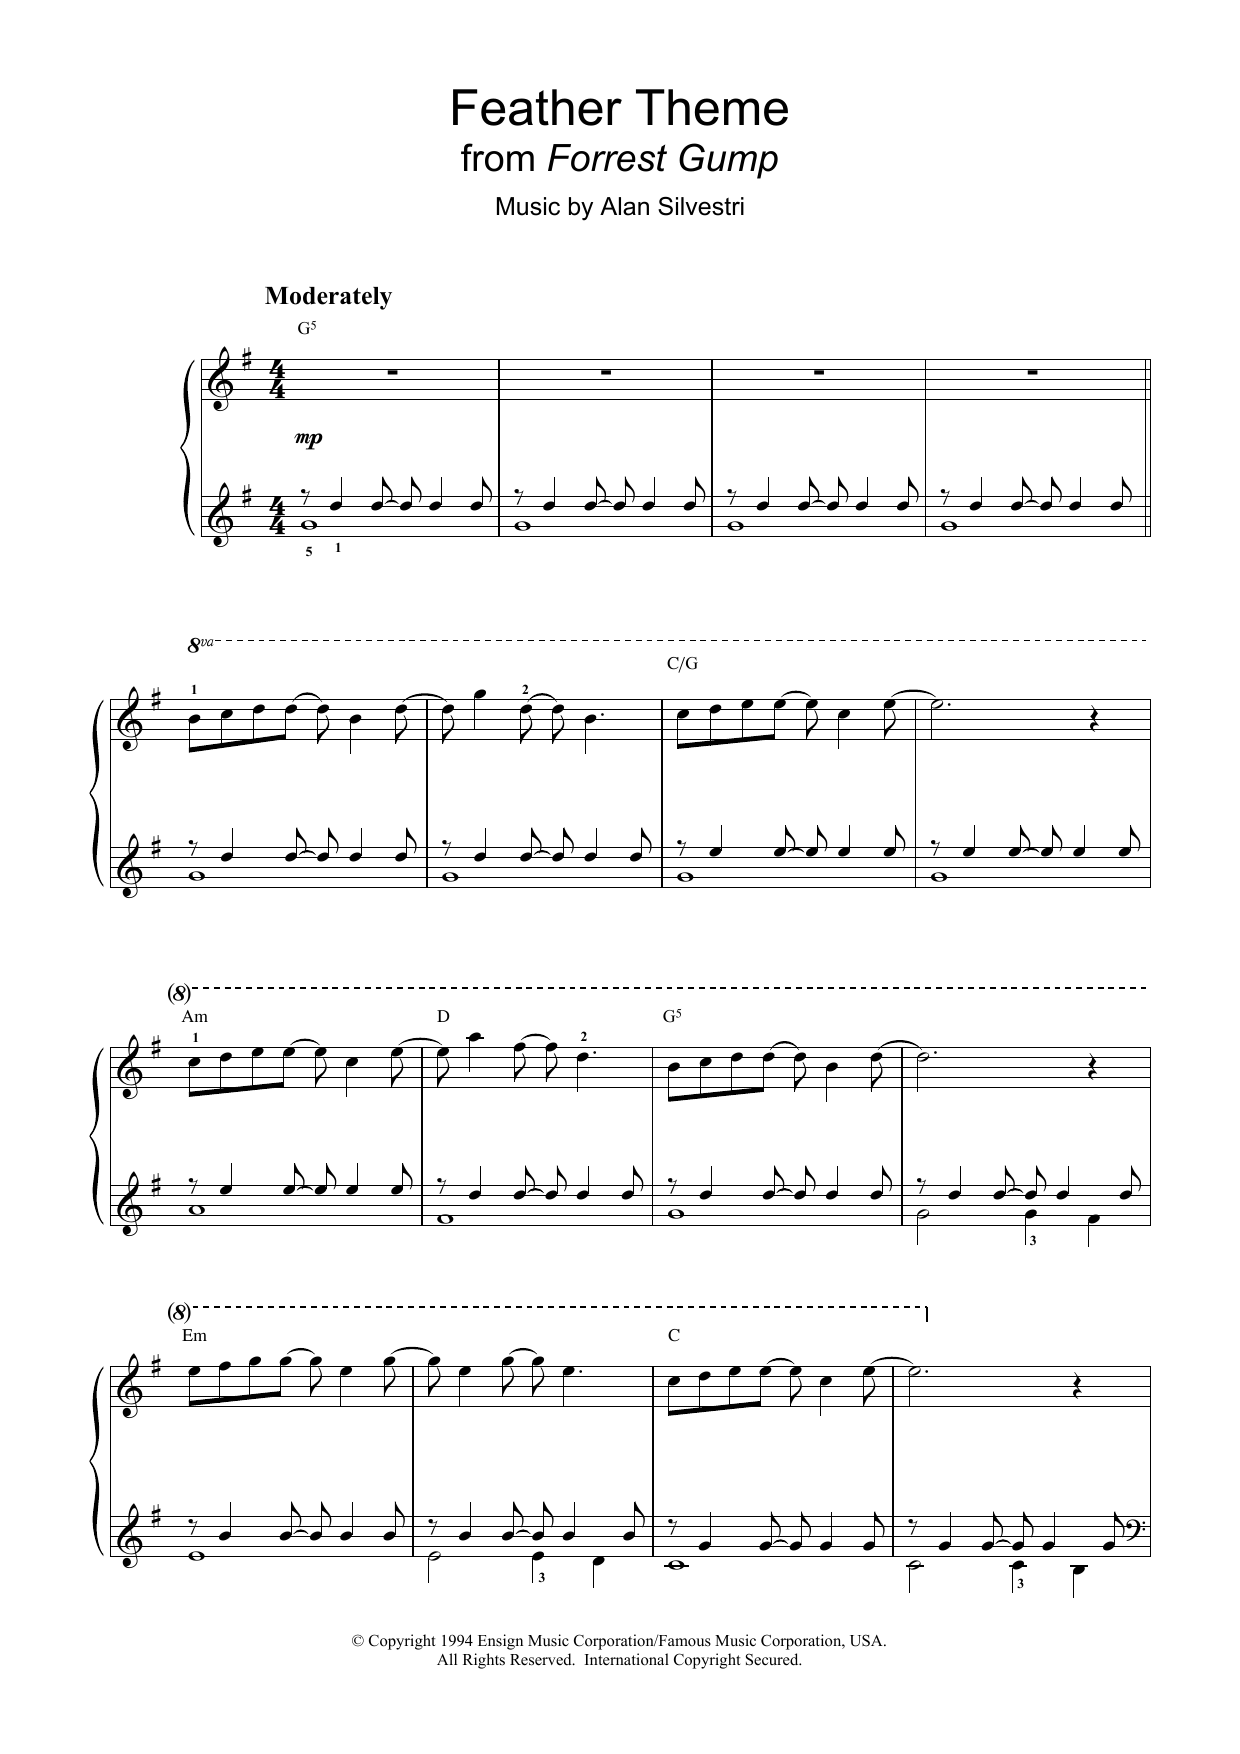 Download Alan Silvestri Forrest Gump - Main Title (Feather Them Sheet Music